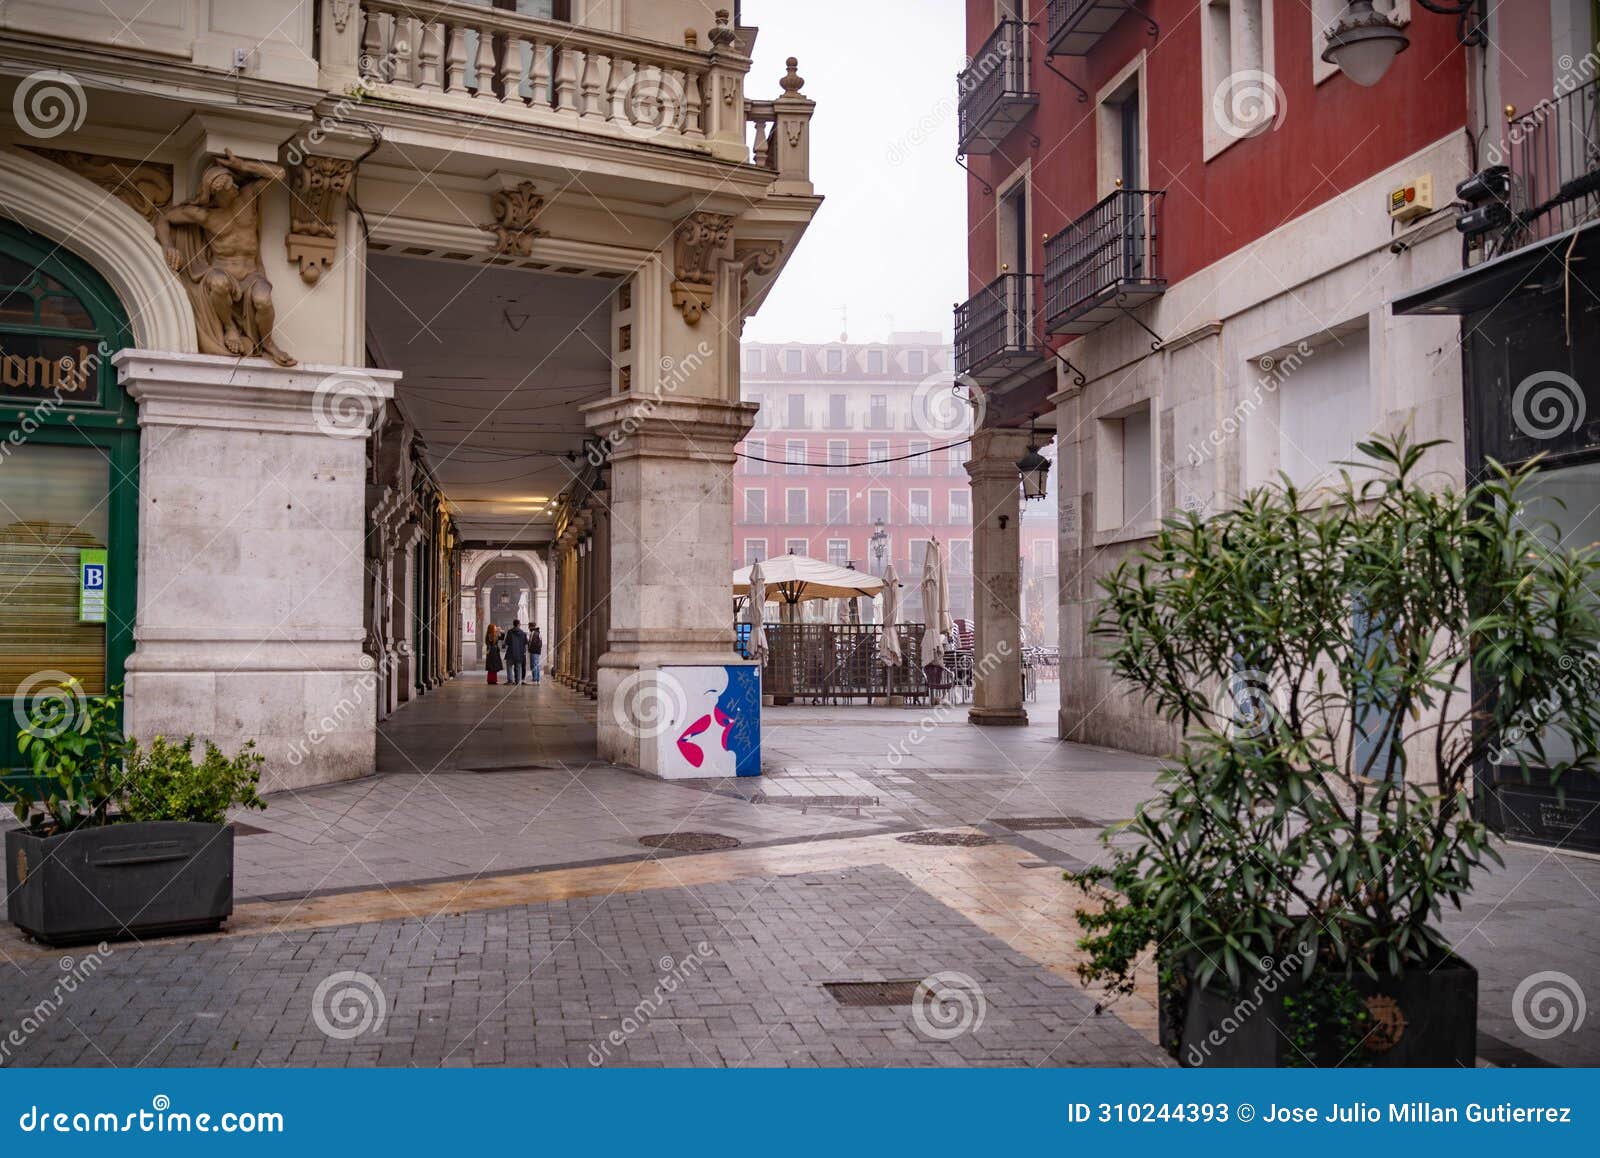 valladolid historical and cultural city of spain.